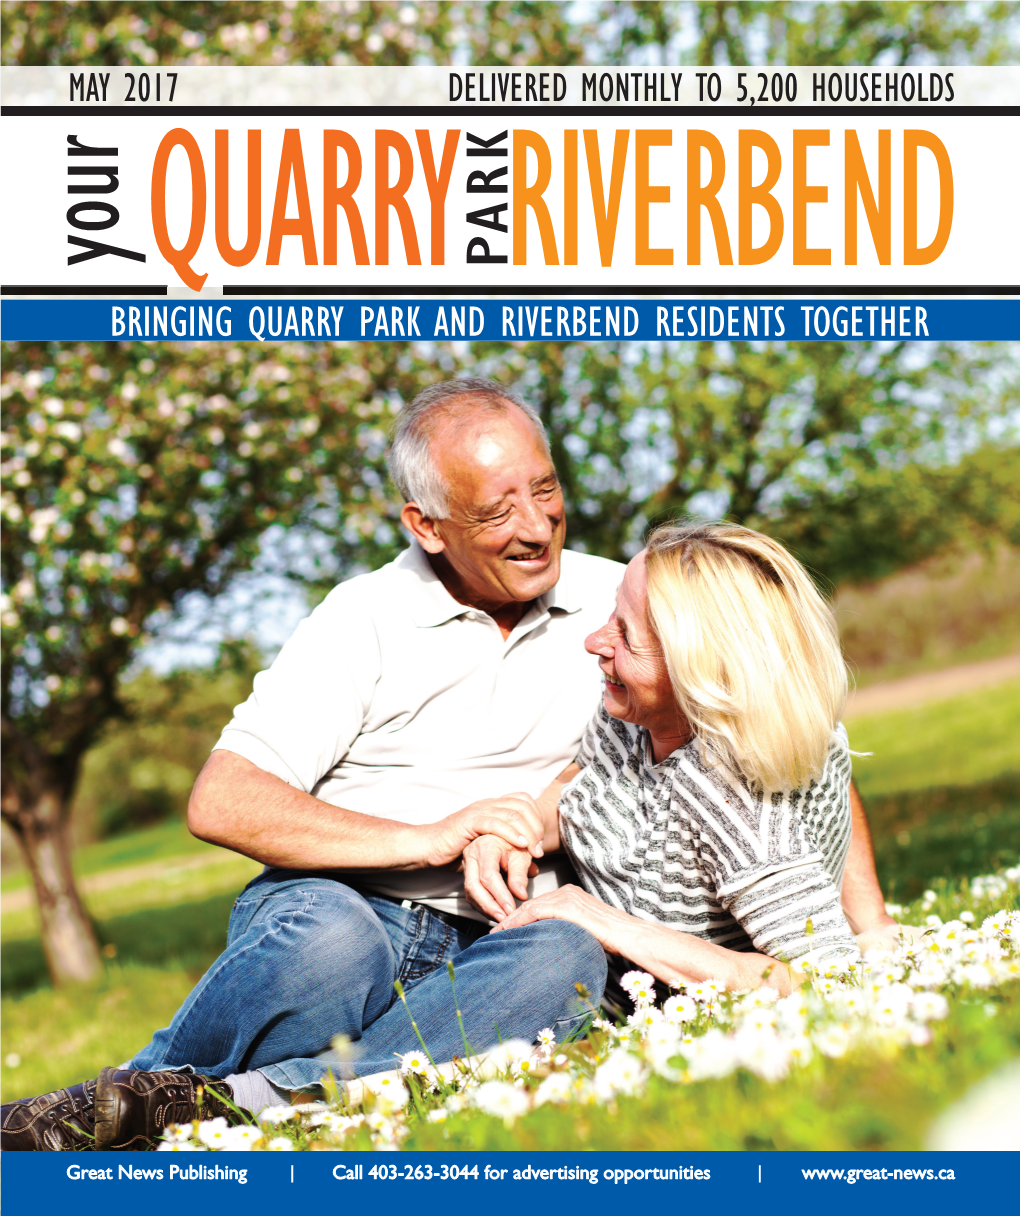 QUARRY RIVERBEND BRINGING QUARRY PARK and RIVERBEND RESIDENTS TOGETHER FYI - Great News Publishing Chooses to Forge Ahead During All Economic Downturns